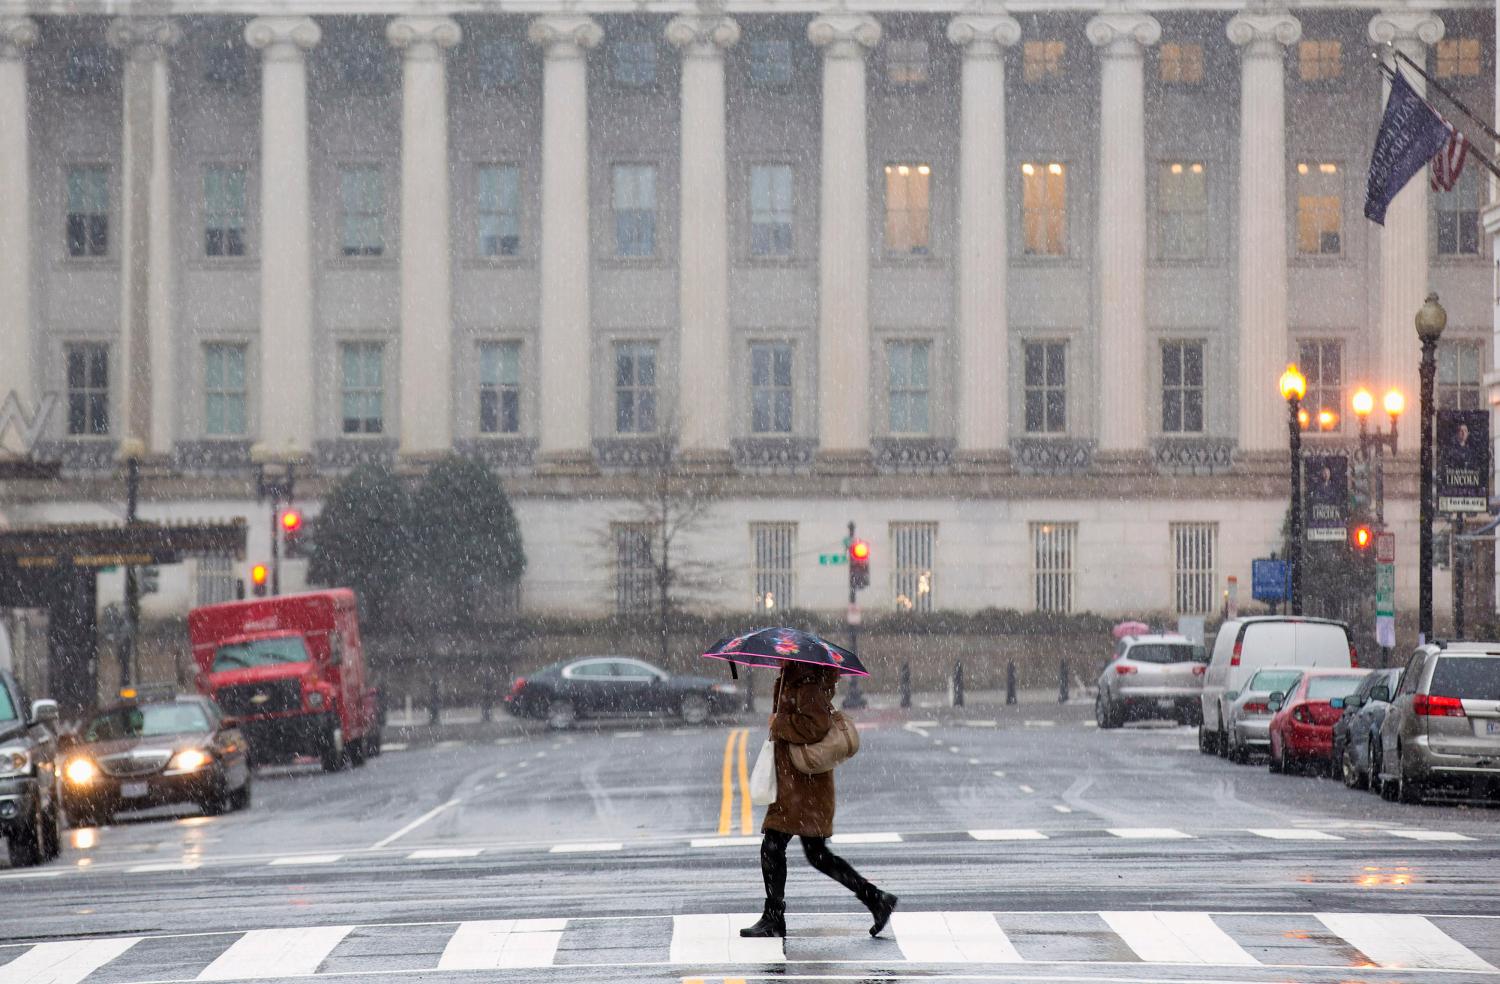 A woman crosses a nearly empty street at rush hour, near the U.S. Treasury Building during a snow storm in Washington March 5, 2015. A large winter storm reaching from Texas to southern New England, which prompted school closings and led to almost 2,300 flight cancellations, had dumped over a foot (30 cm) of snow on parts of the eastern United States by early Thursday morning. REUTERS/Joshua Roberts (UNITED STATES - Tags: ENVIRONMENT SOCIETY) - GM1EB351UKX01